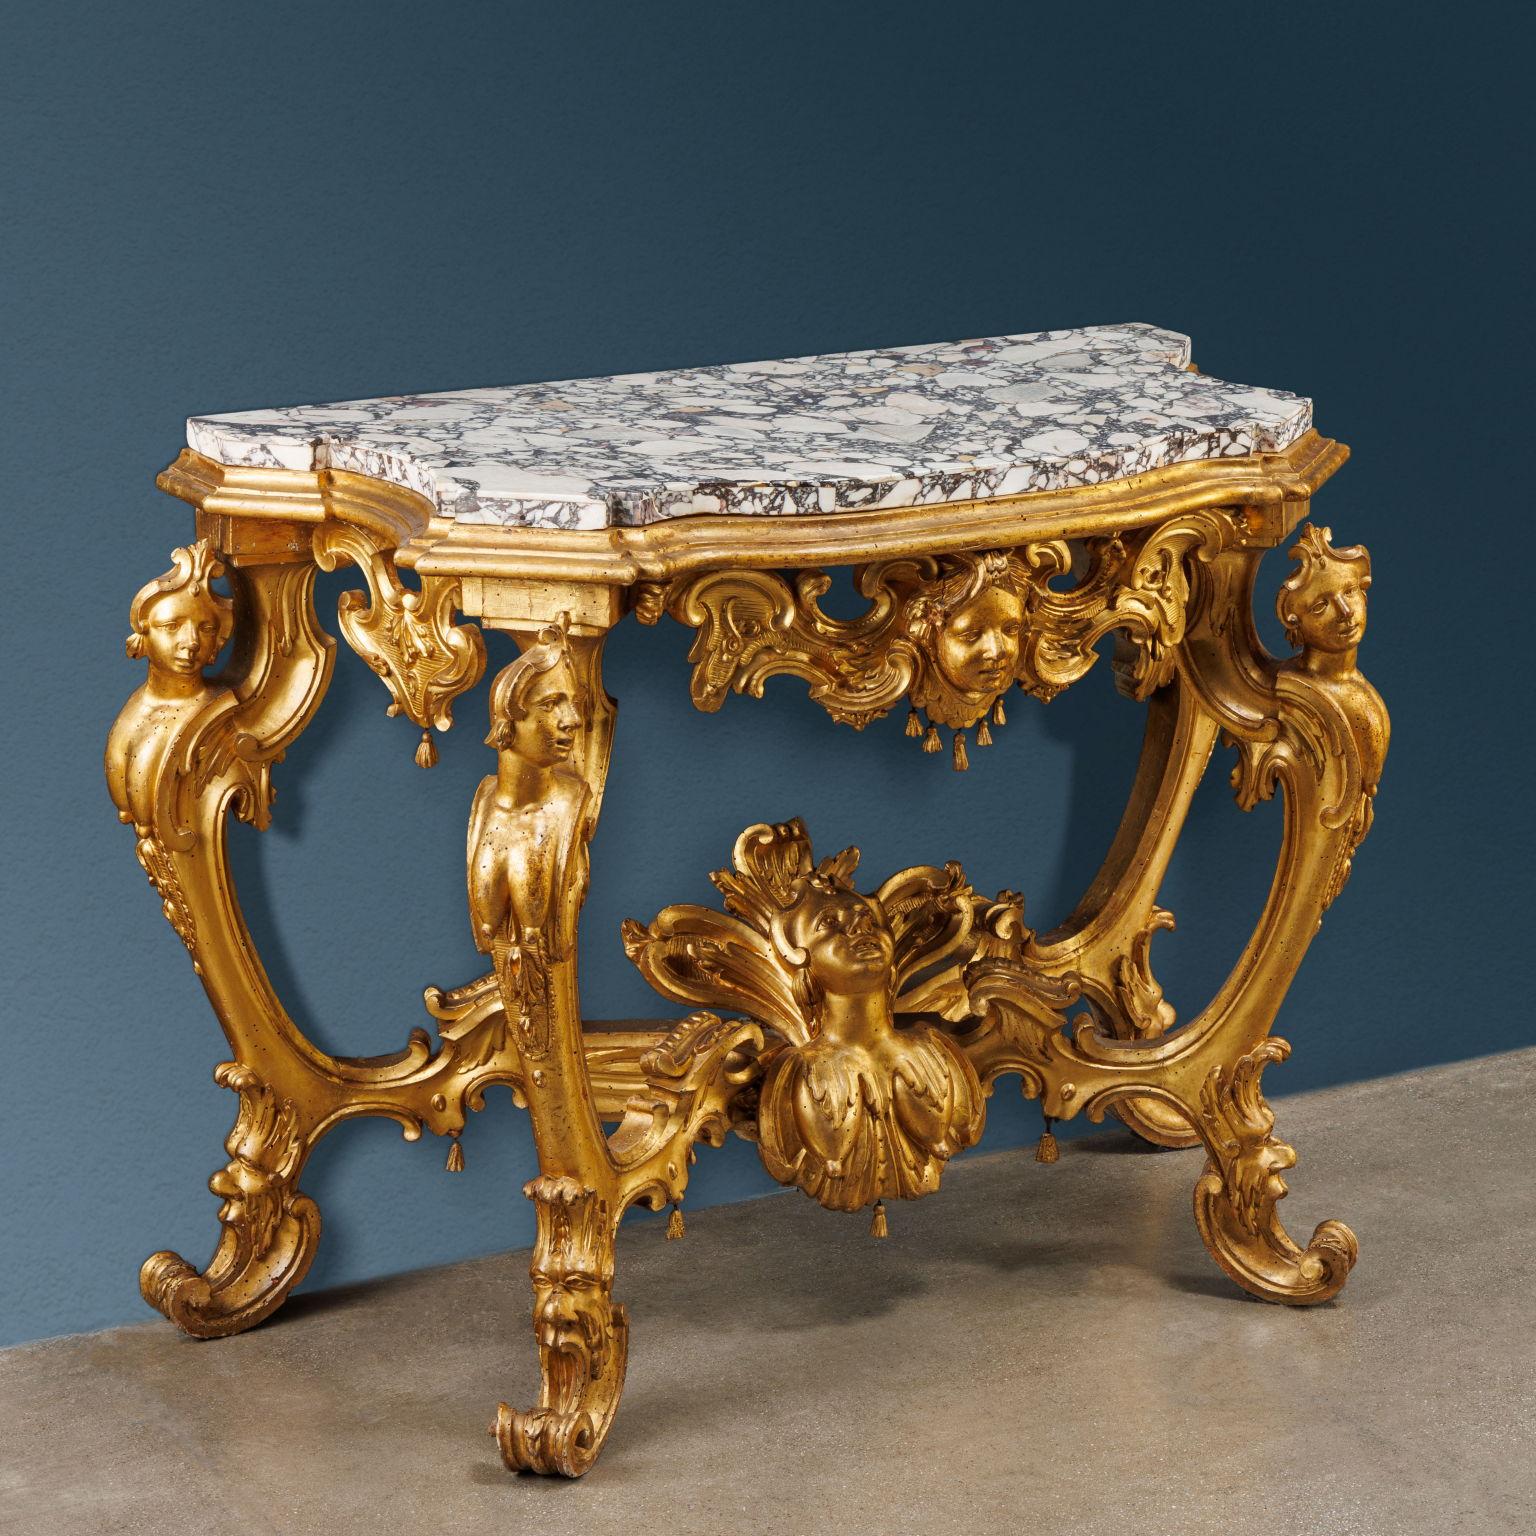 Carved and gilded wooden console table. It rests on four opposing double-curved supports ending in full-bodied curling volutes held by masks; carved female caryatids rest on the upper volutes in the round. The connection of the legs is made by